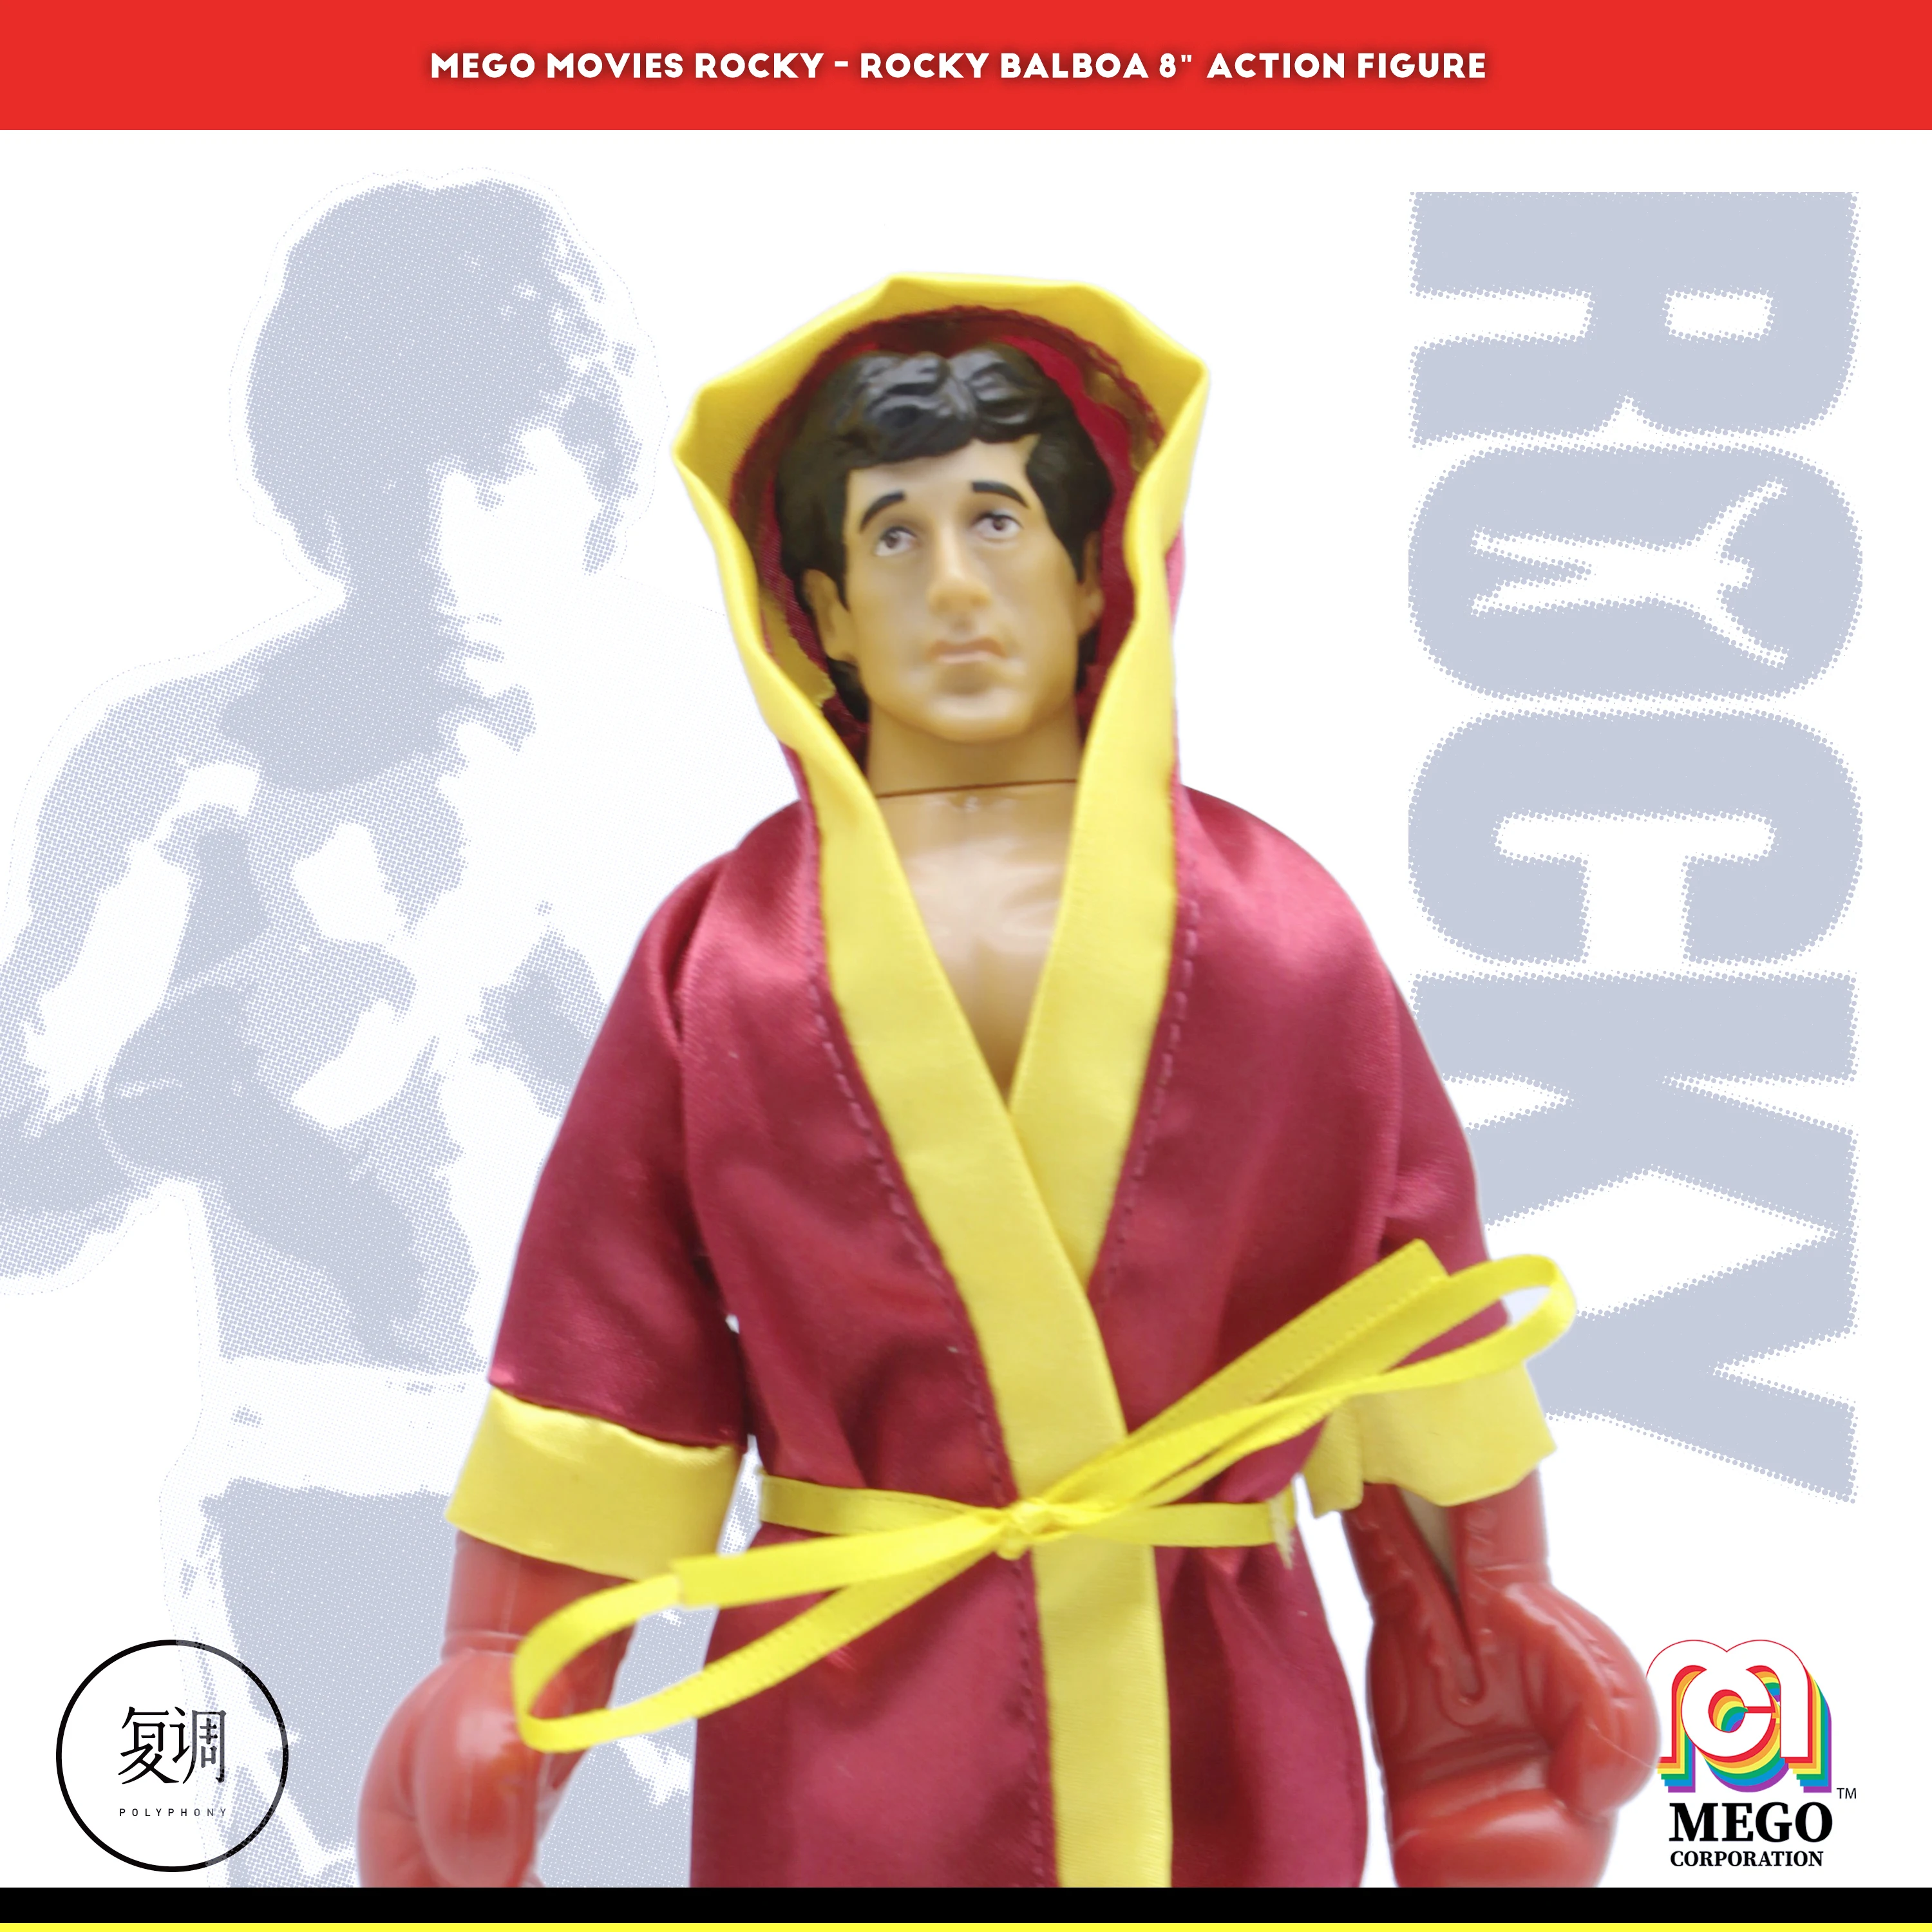 Mego Rocky Balboa 8" Action Figure Movies 2019 Unopened for sale online 